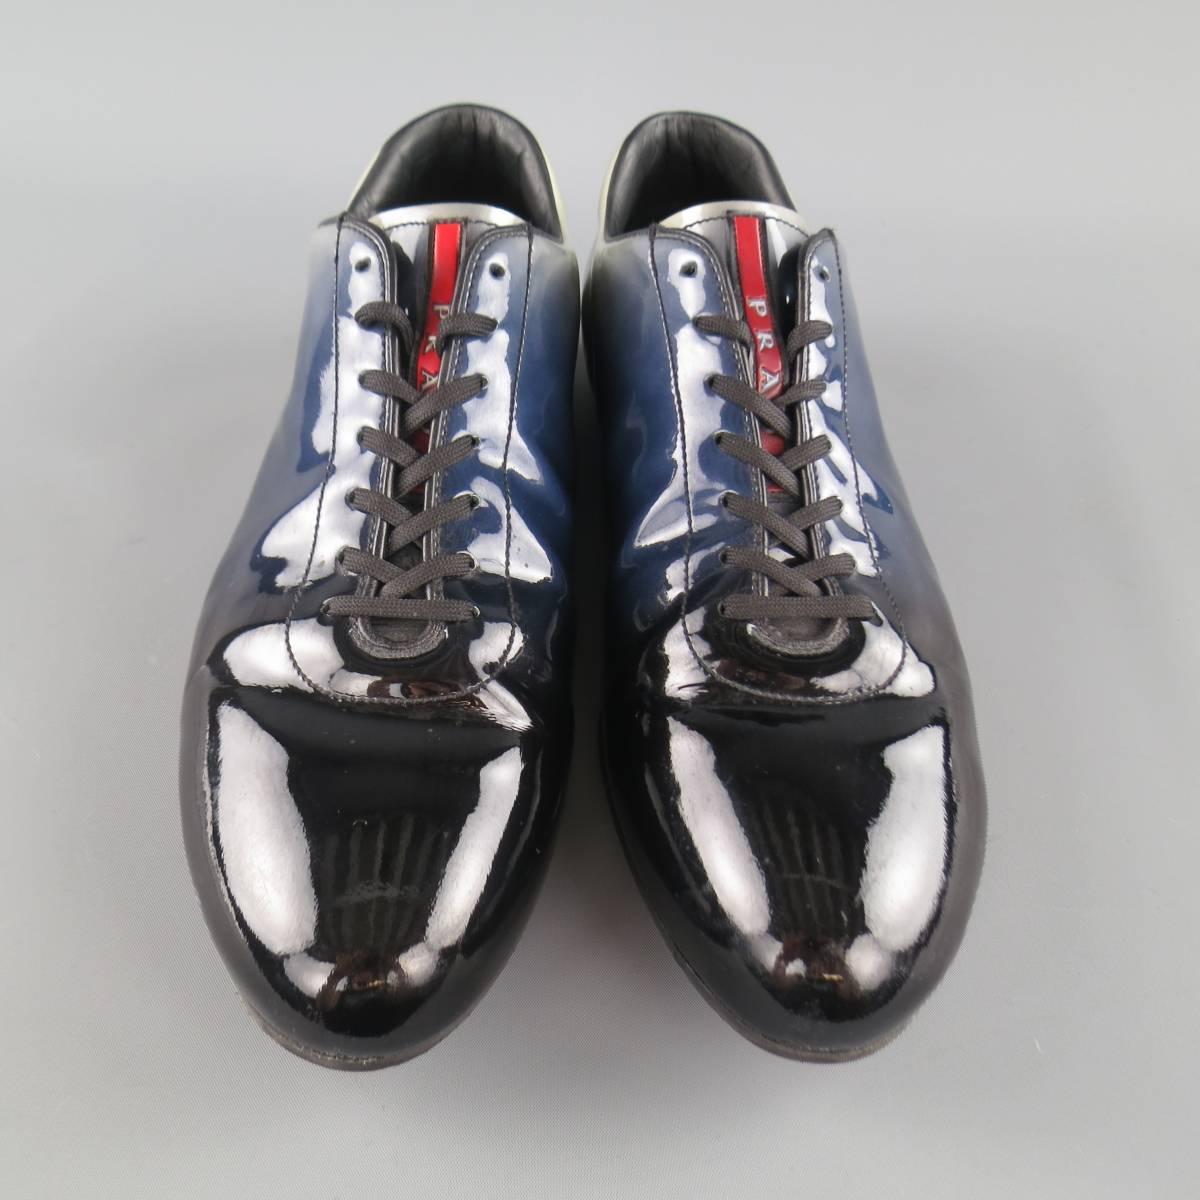 PRADA sneaker dress shoes come in a high shine patent leather with a black to blue to light gray ombre gradient effect and rubber sole.  Scruffs throughout. As-Is. Made in Italy.
 
Good Pre-Owned Condition.
Marked: UK 9
 
Outsole: 12 x 4 in.
 


Web